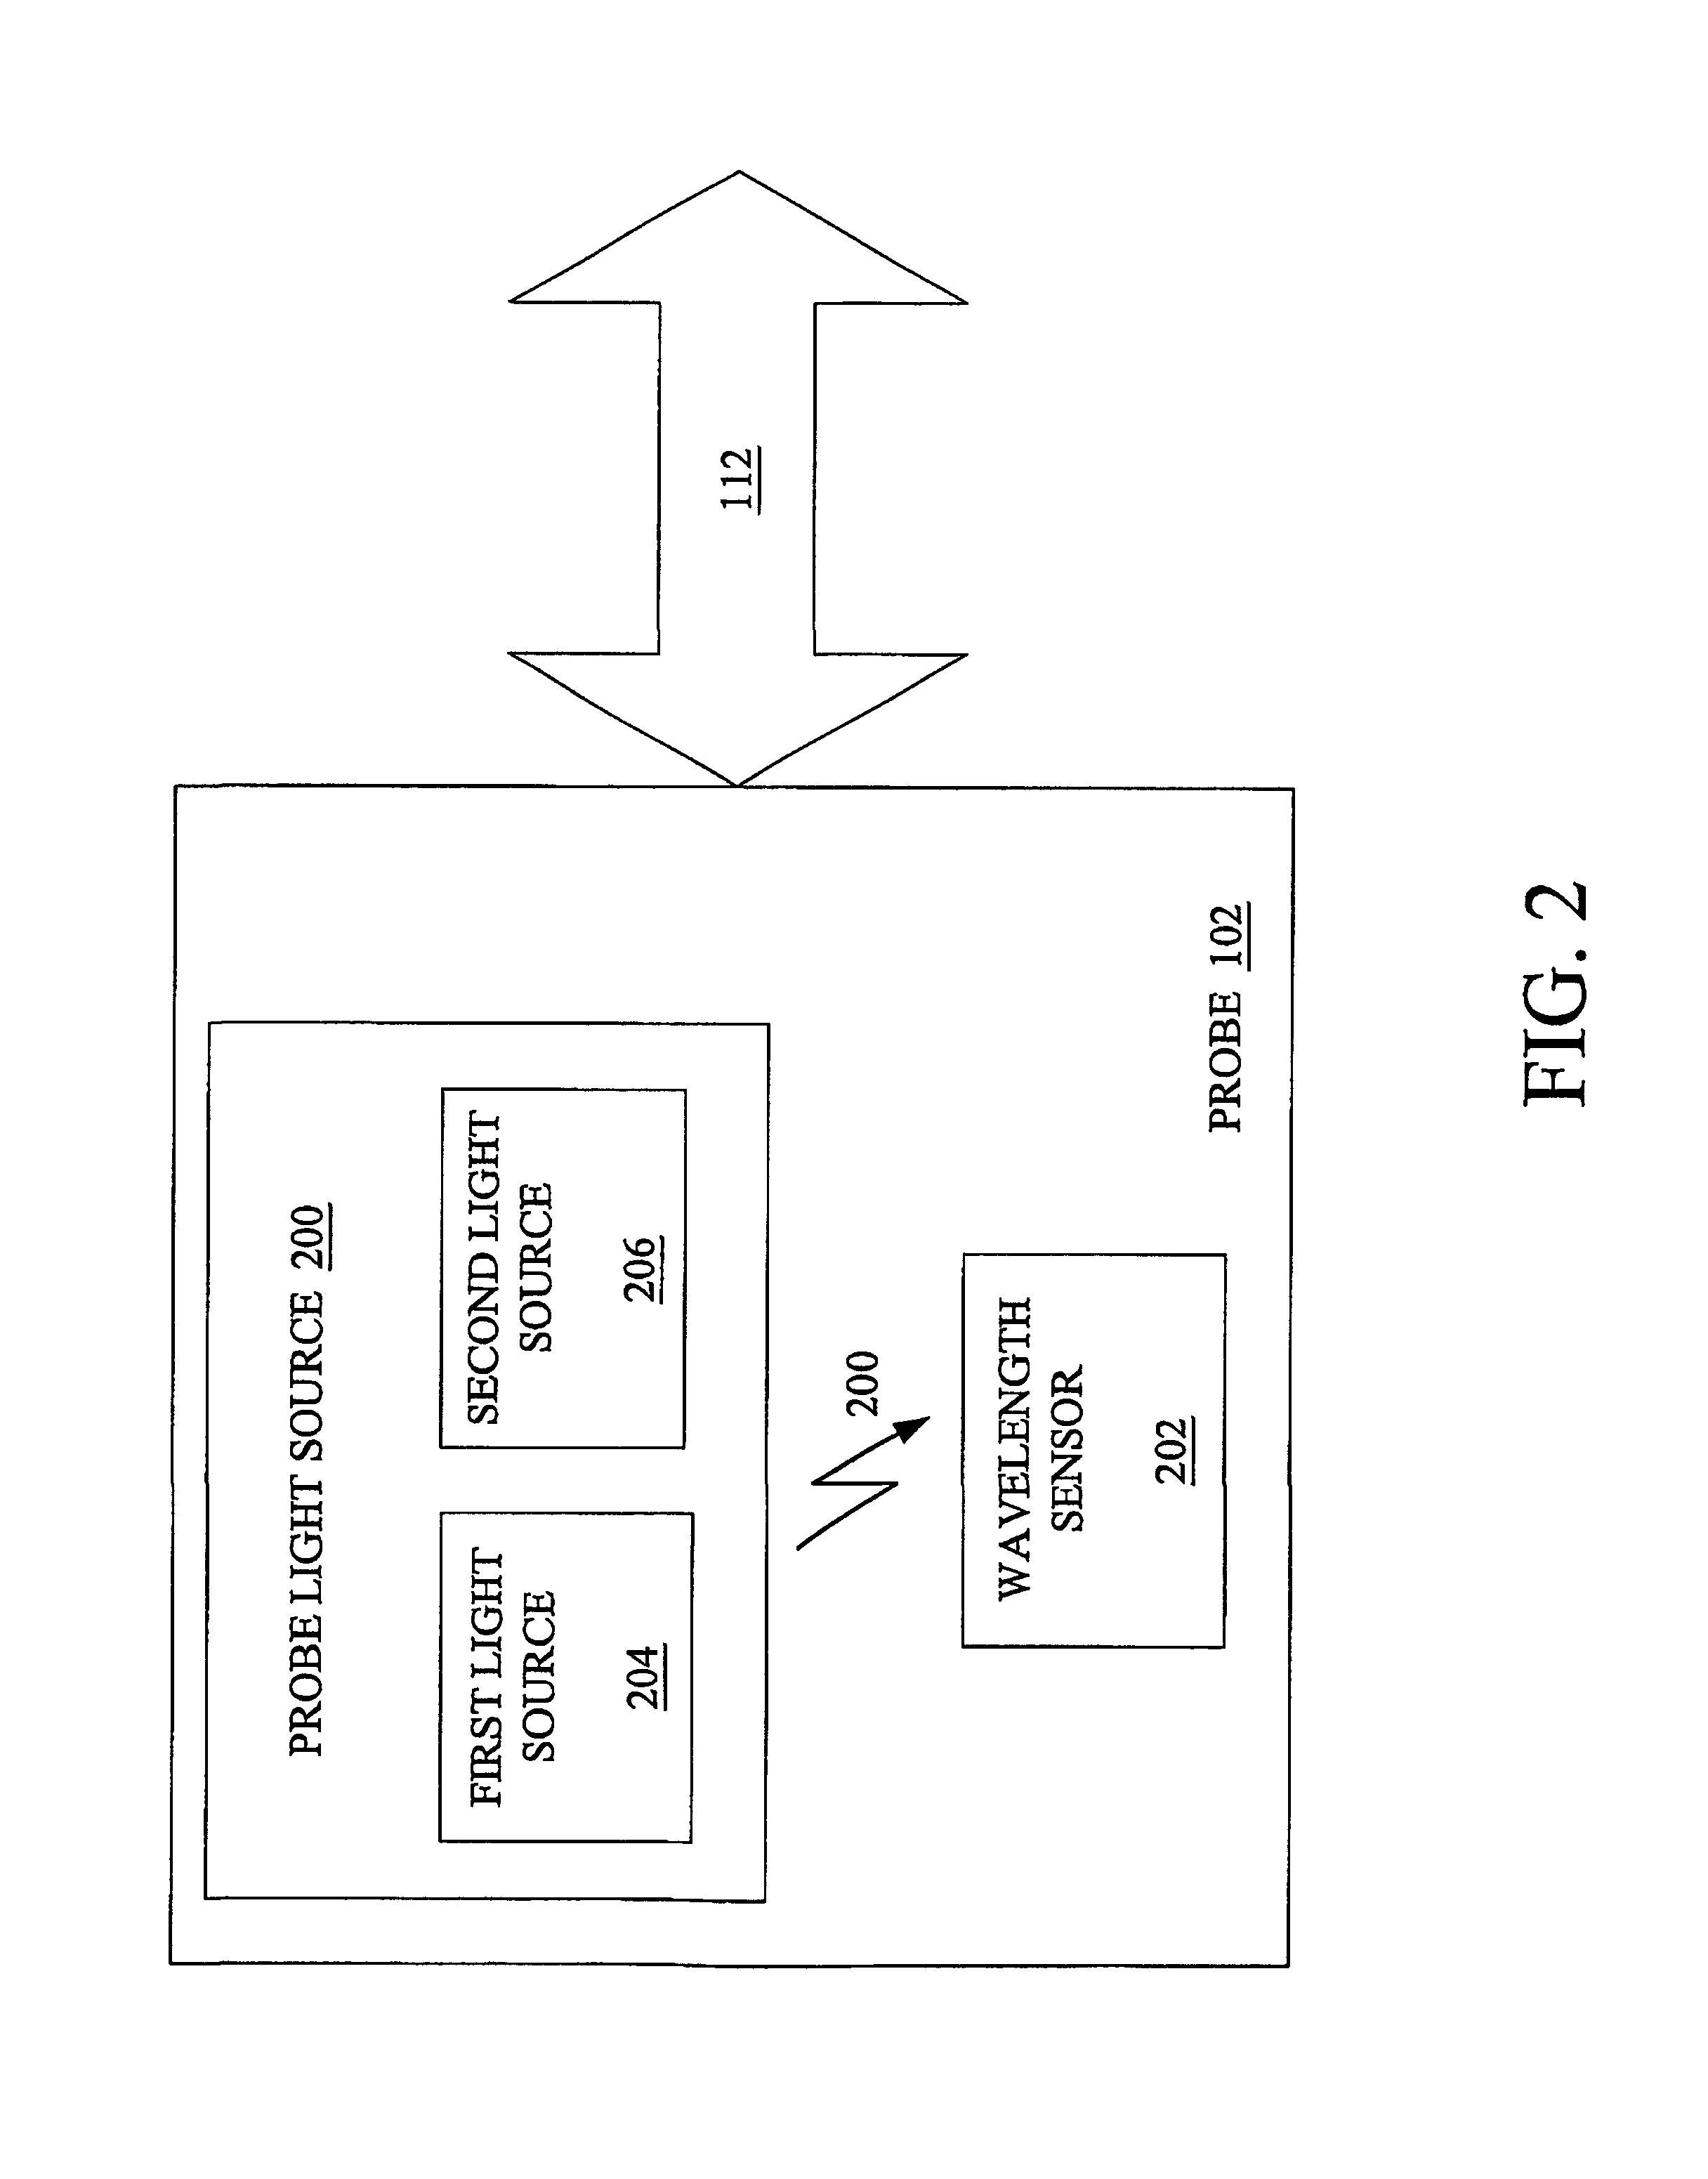 System and method for a self-calibrating non-invasive sensor